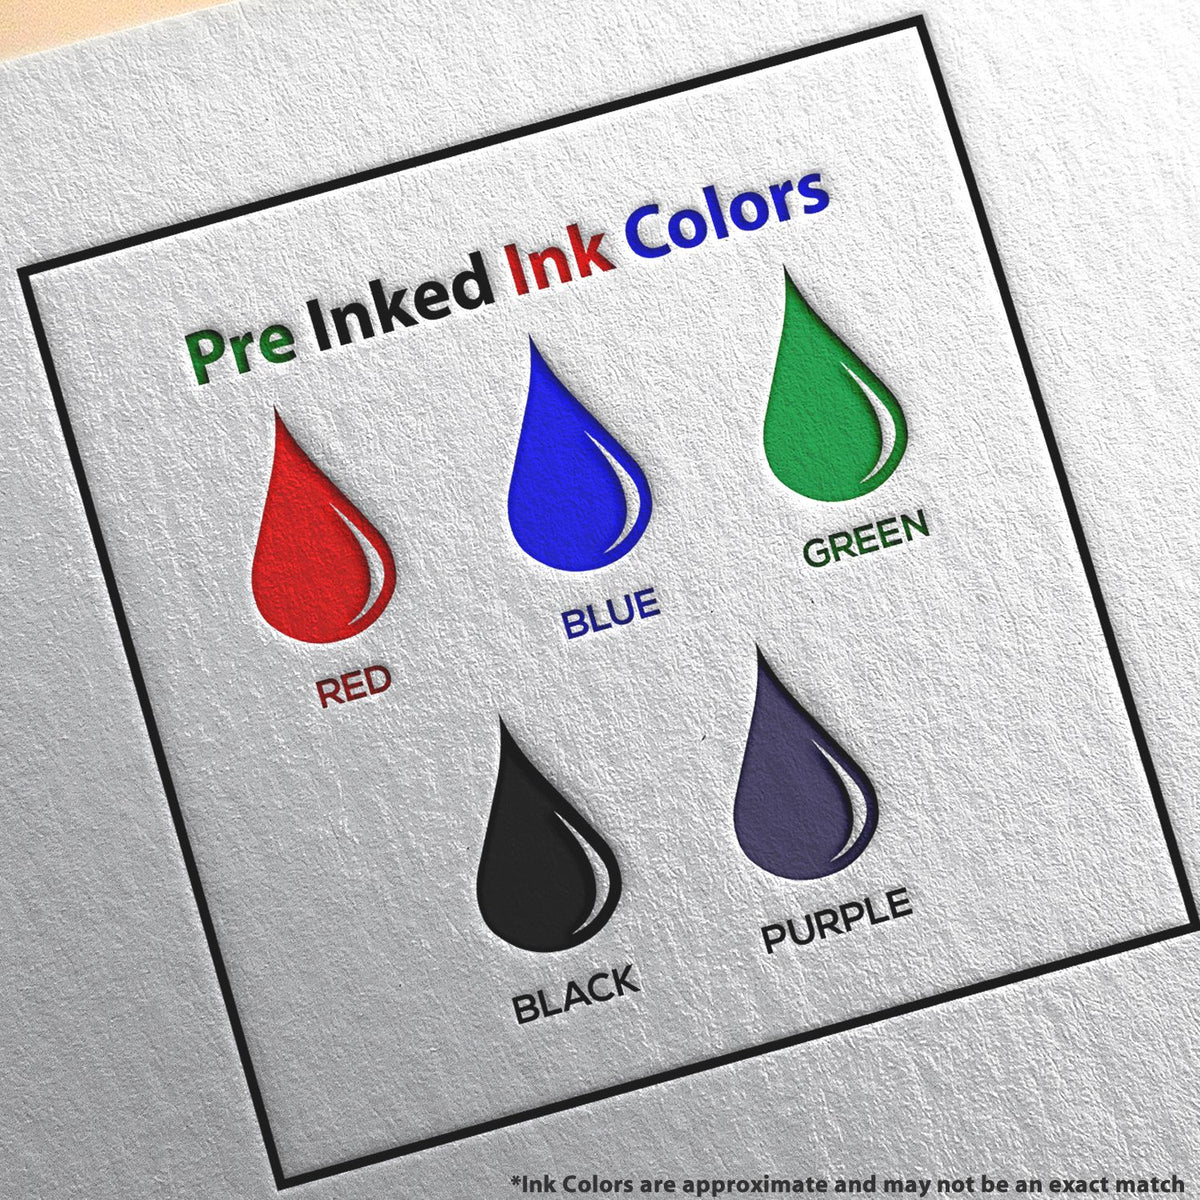 A picture showing the different ink colors or hues available for the Slim Pre-Inked West Virginia Professional Geologist Seal Stamp